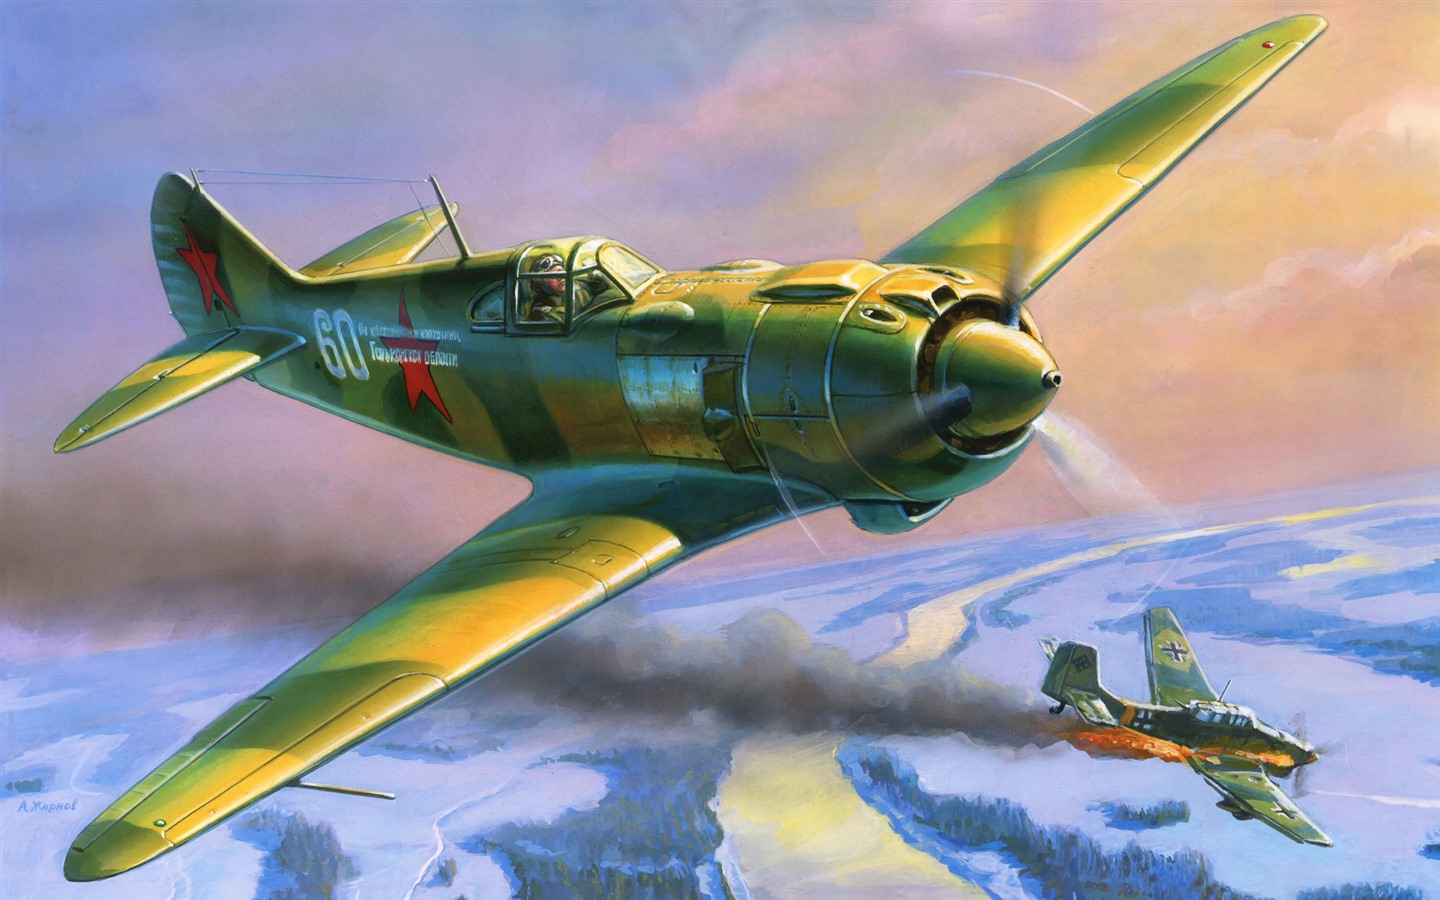 Military aircraft flight exquisite painting wallpapers #20 - 1440x900